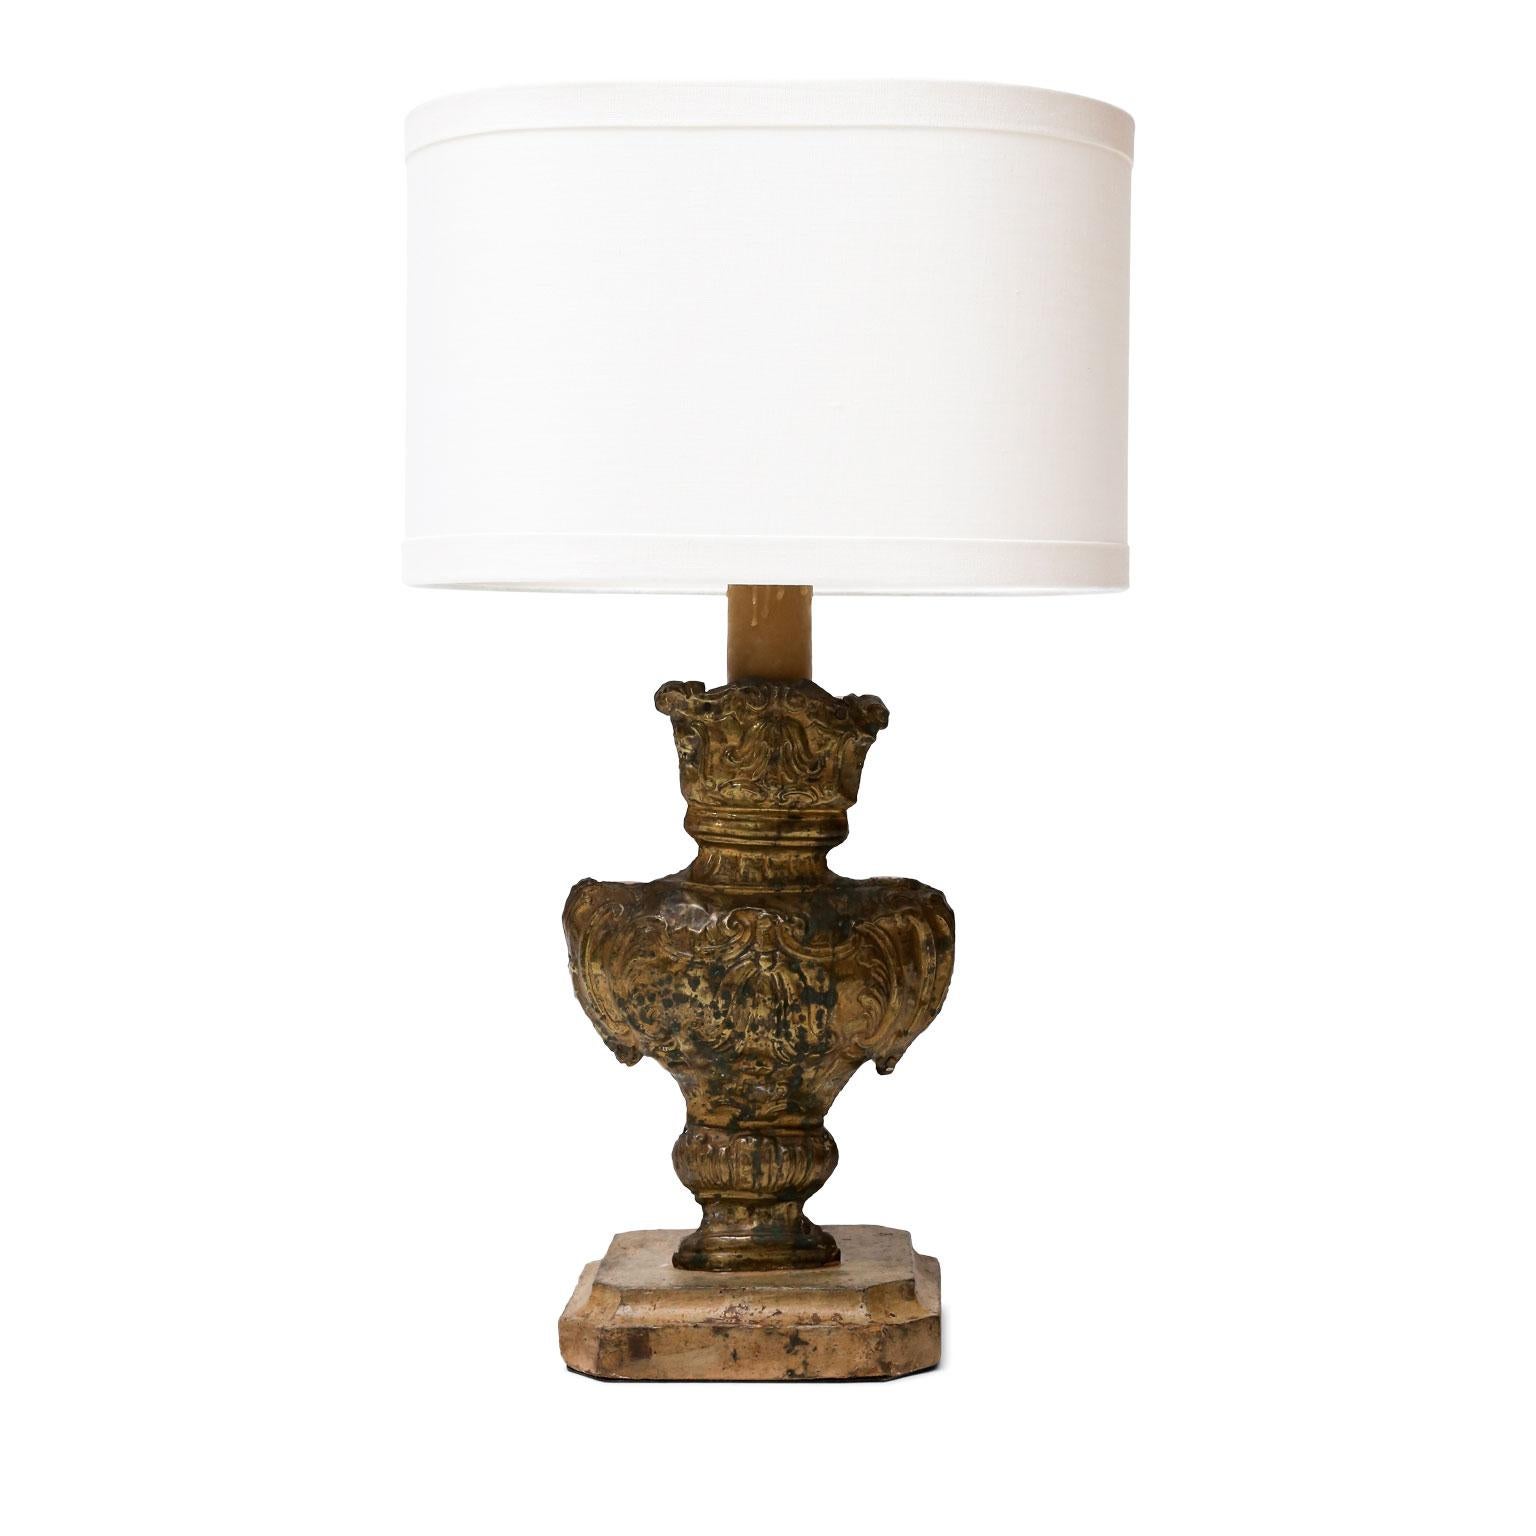 Tole repousse table lamp, newly-wired for use within the USA. 18th century tole repousse decoration applied to an early hand carved urn-shape fragment. Sold with a complementary oval linen shade (measurements in shade).